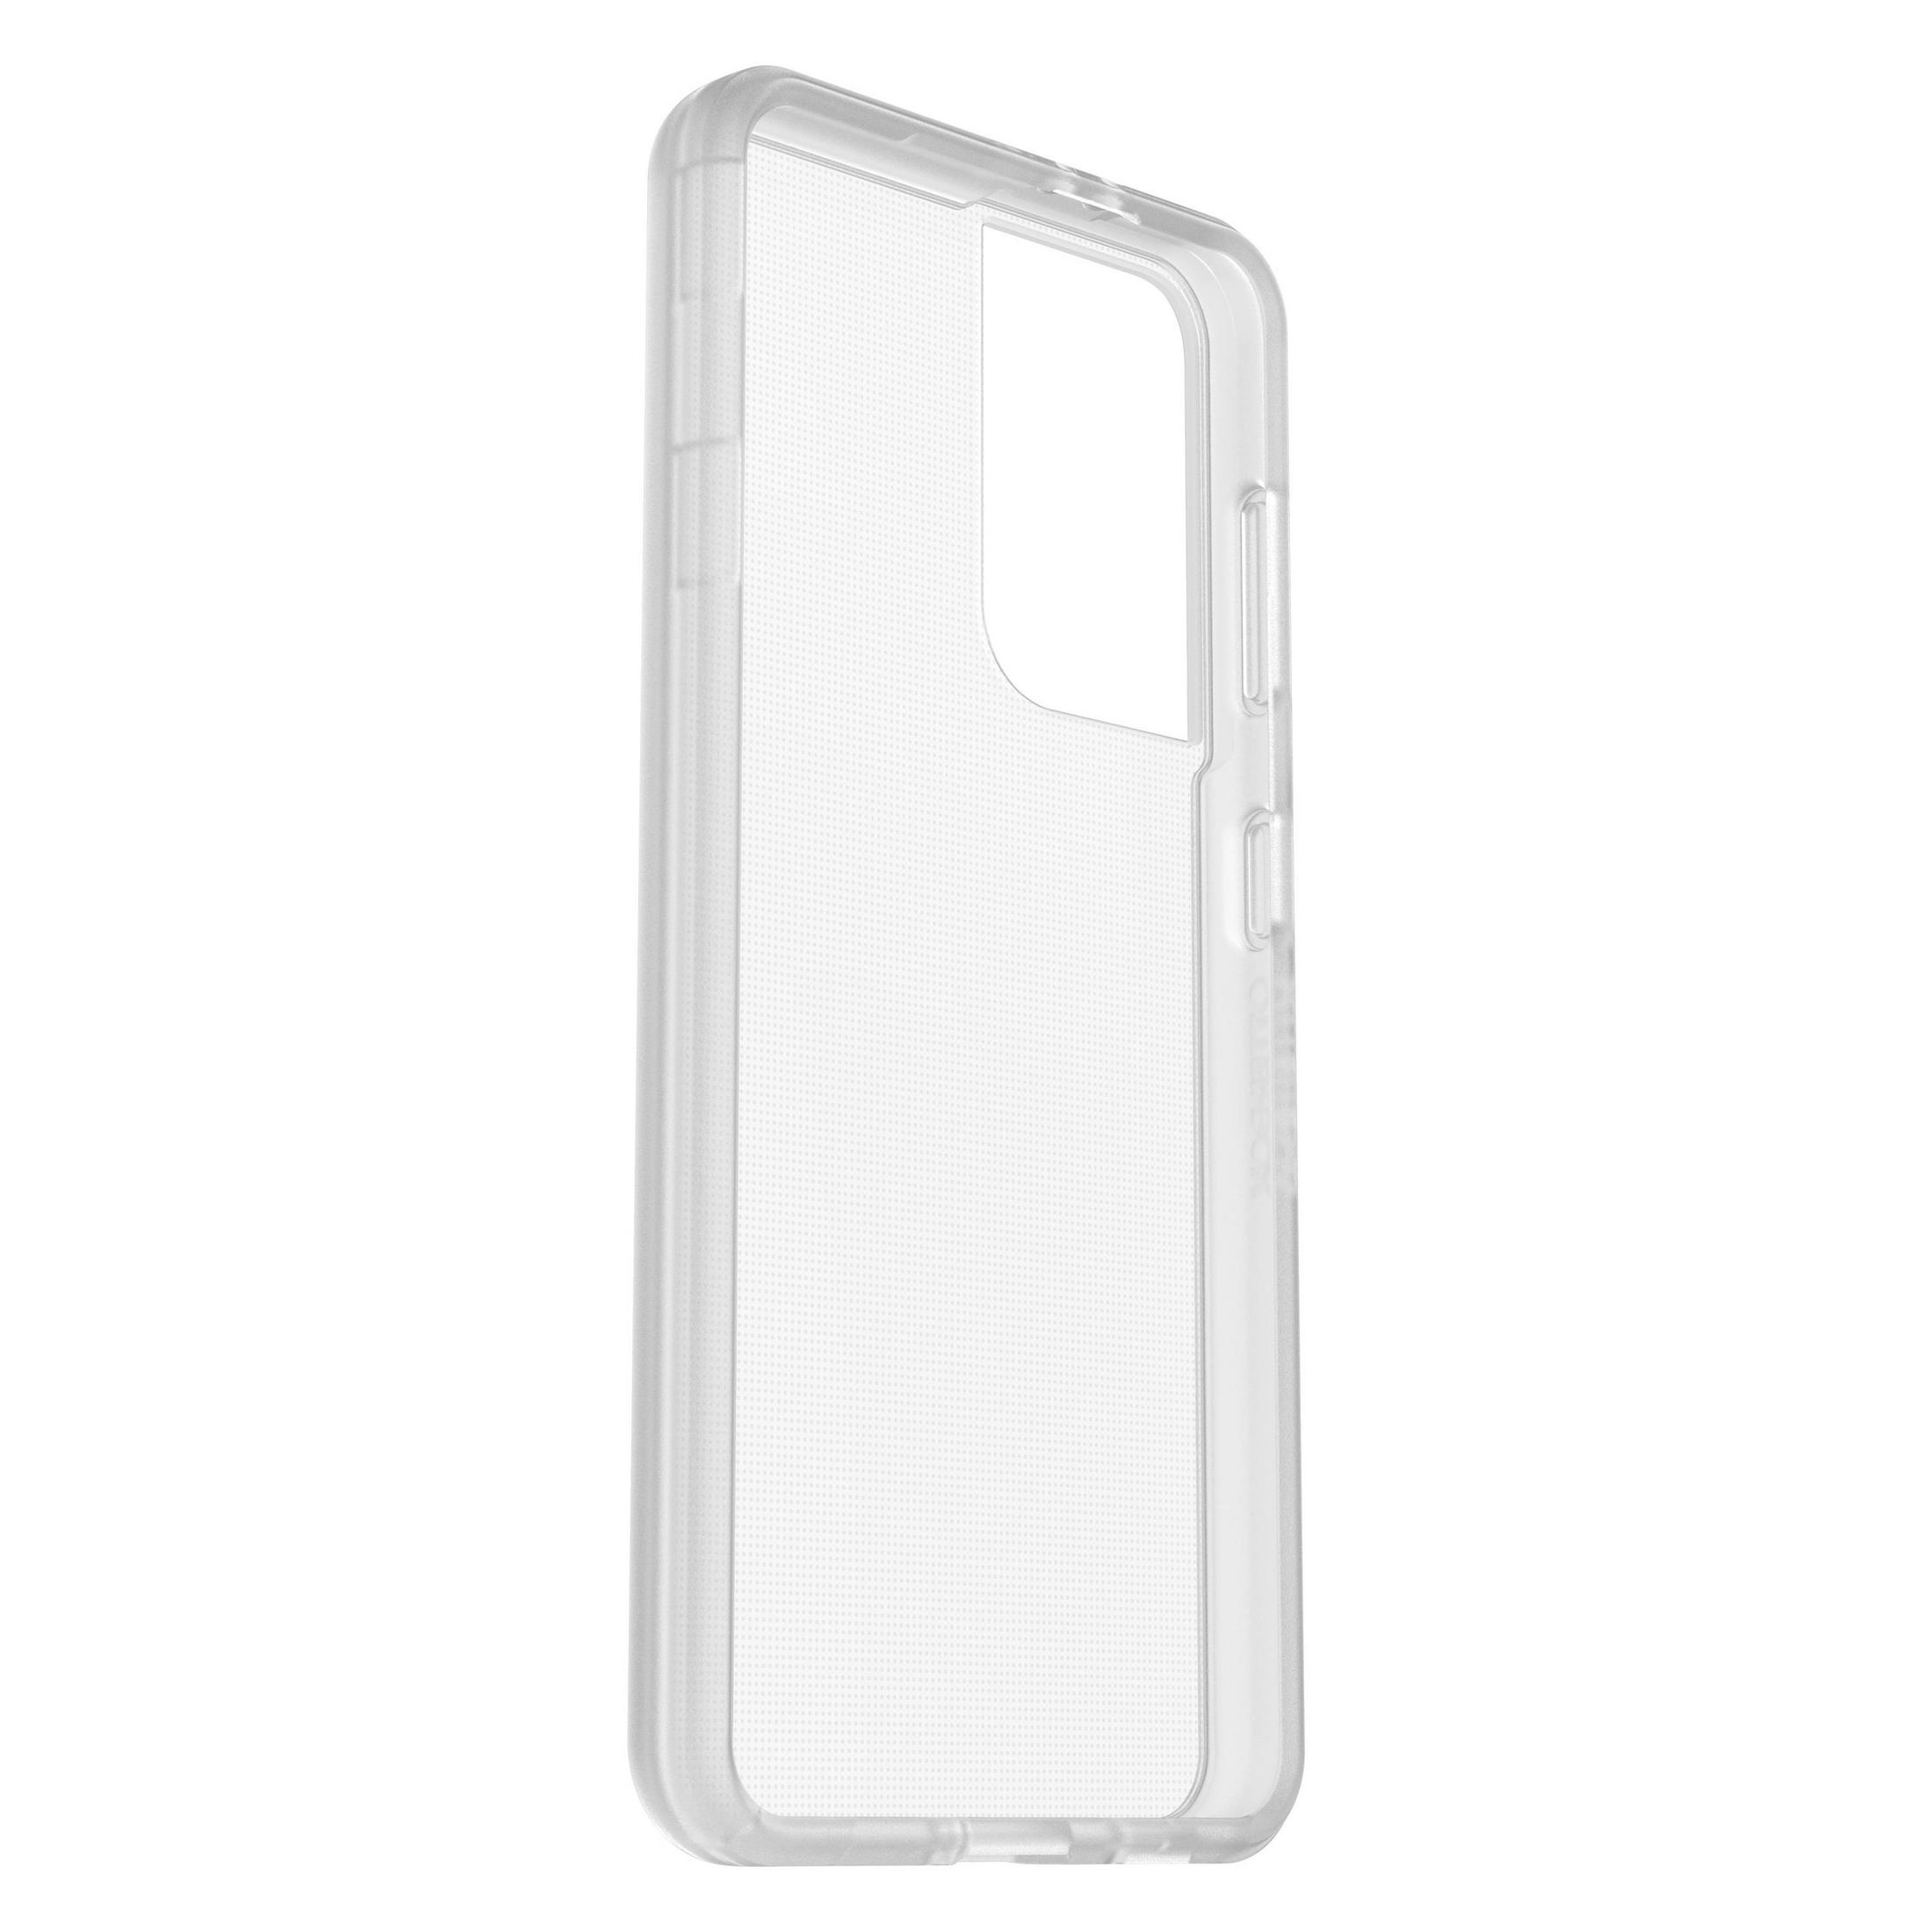 OTTERBOX 78-80332 REACT Galaxy CLEAR, Transparent S21, Backcover, FILM CP + S21 Samsung